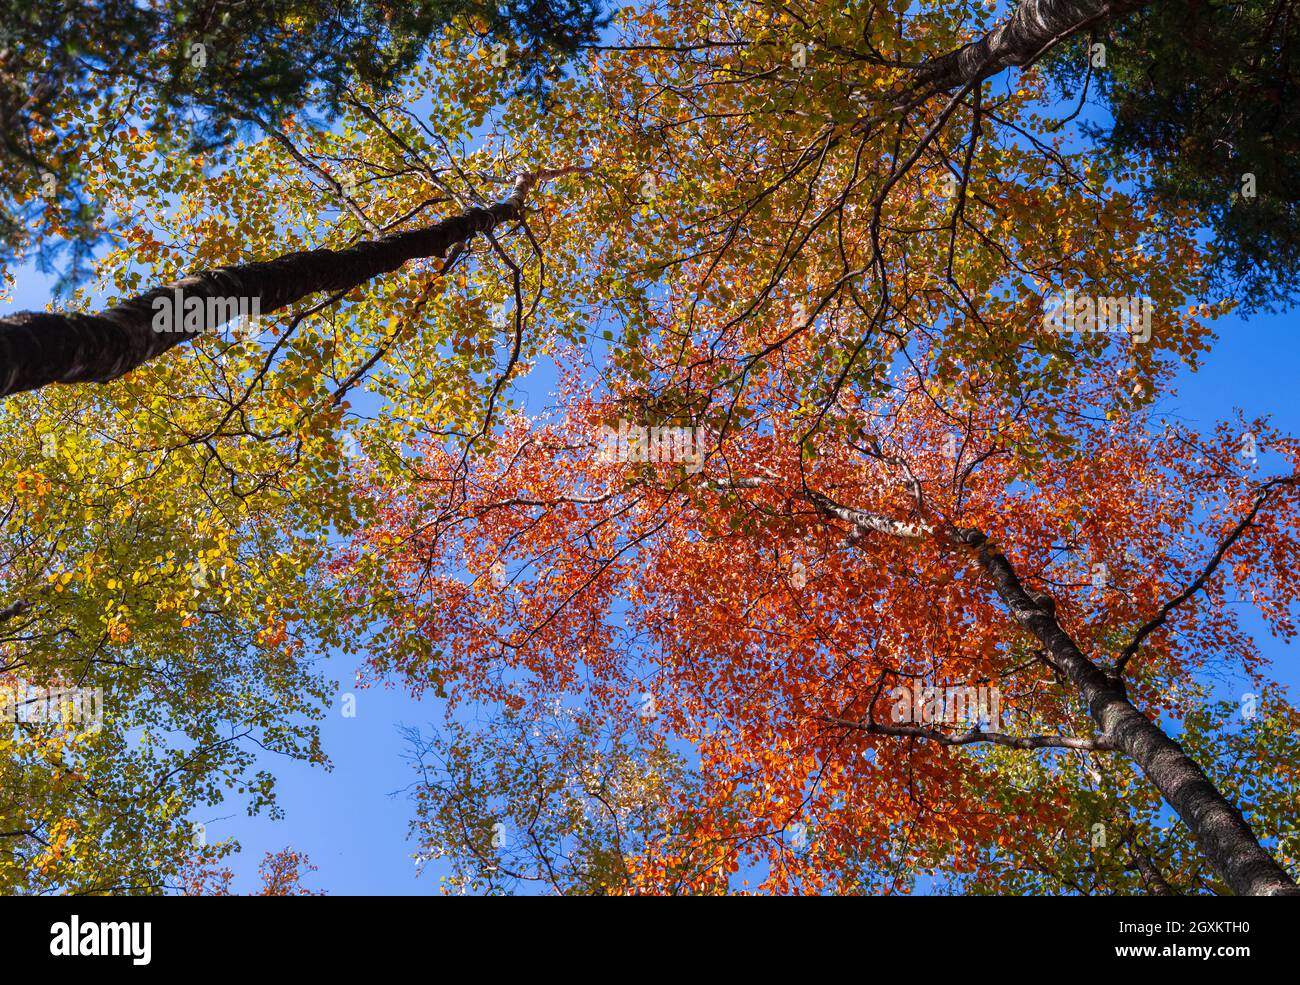 Birch trees with colorful leaves are under clear blue sky on a sunny autumn day Stock Photo